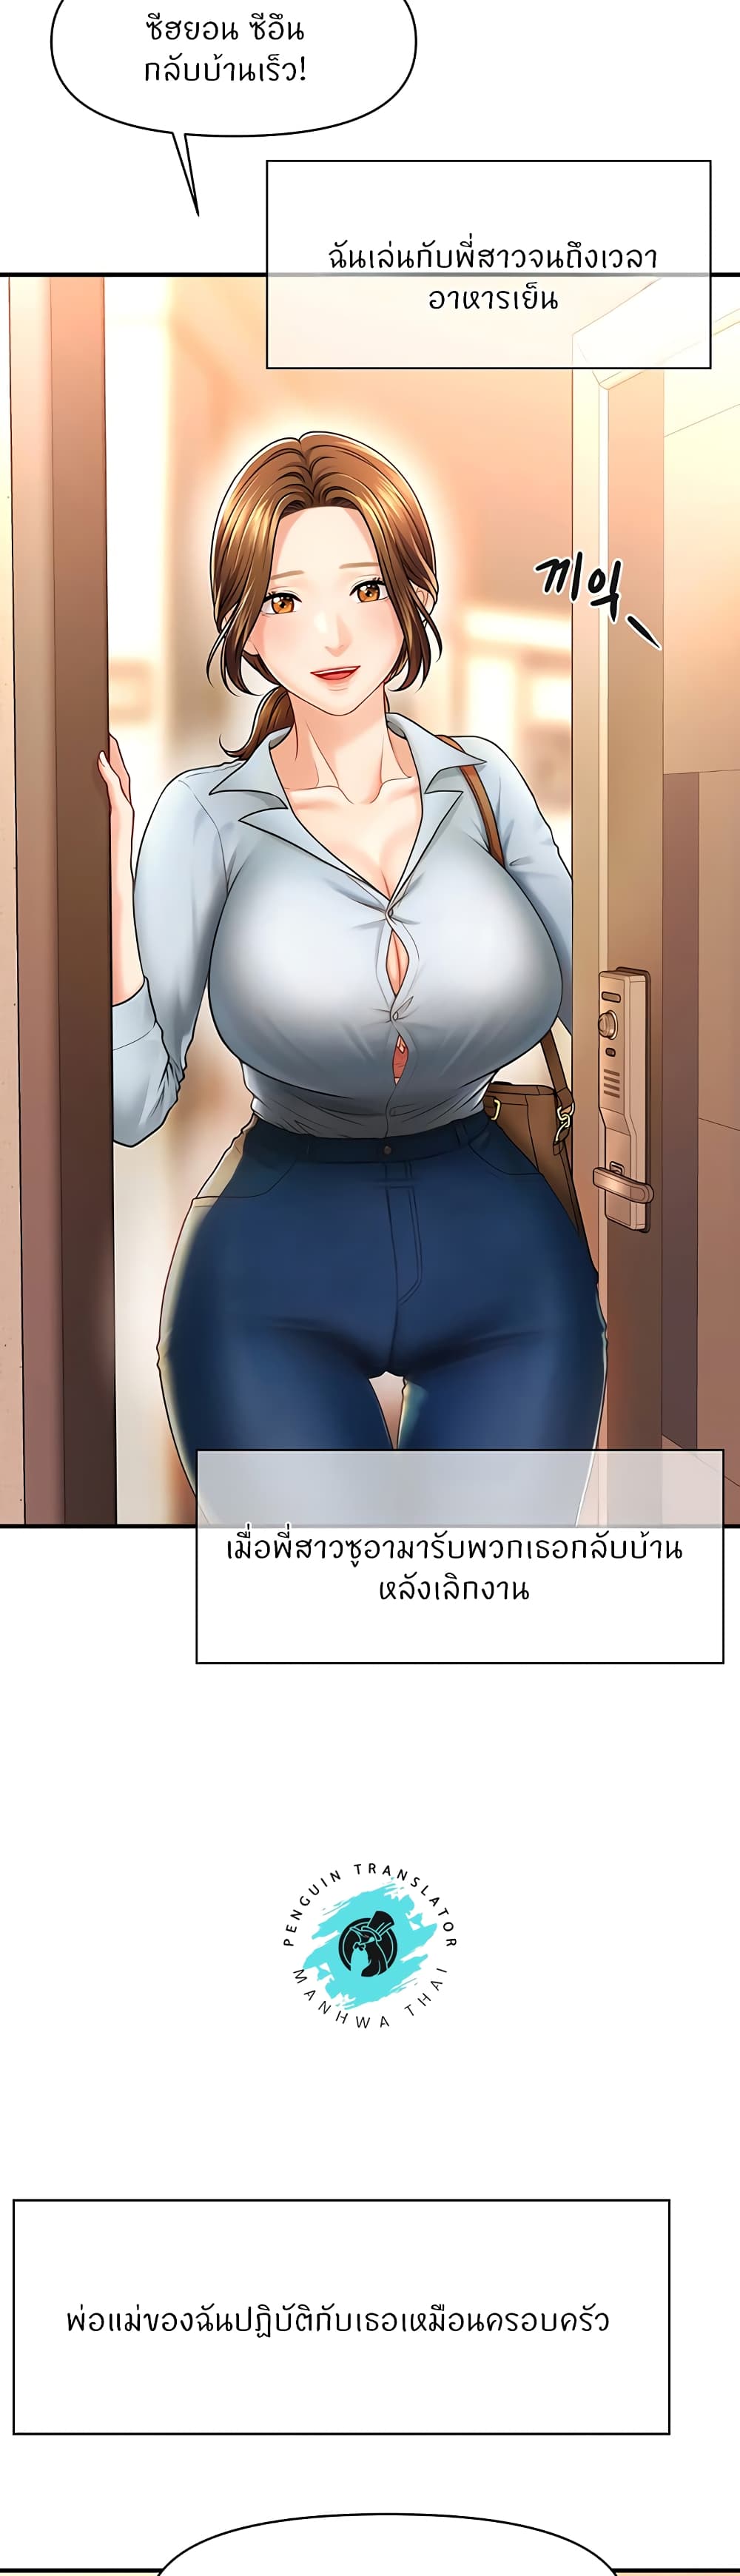 How to Conquer Women with Hypnosis ตอนที่ 1 ภาพ 2